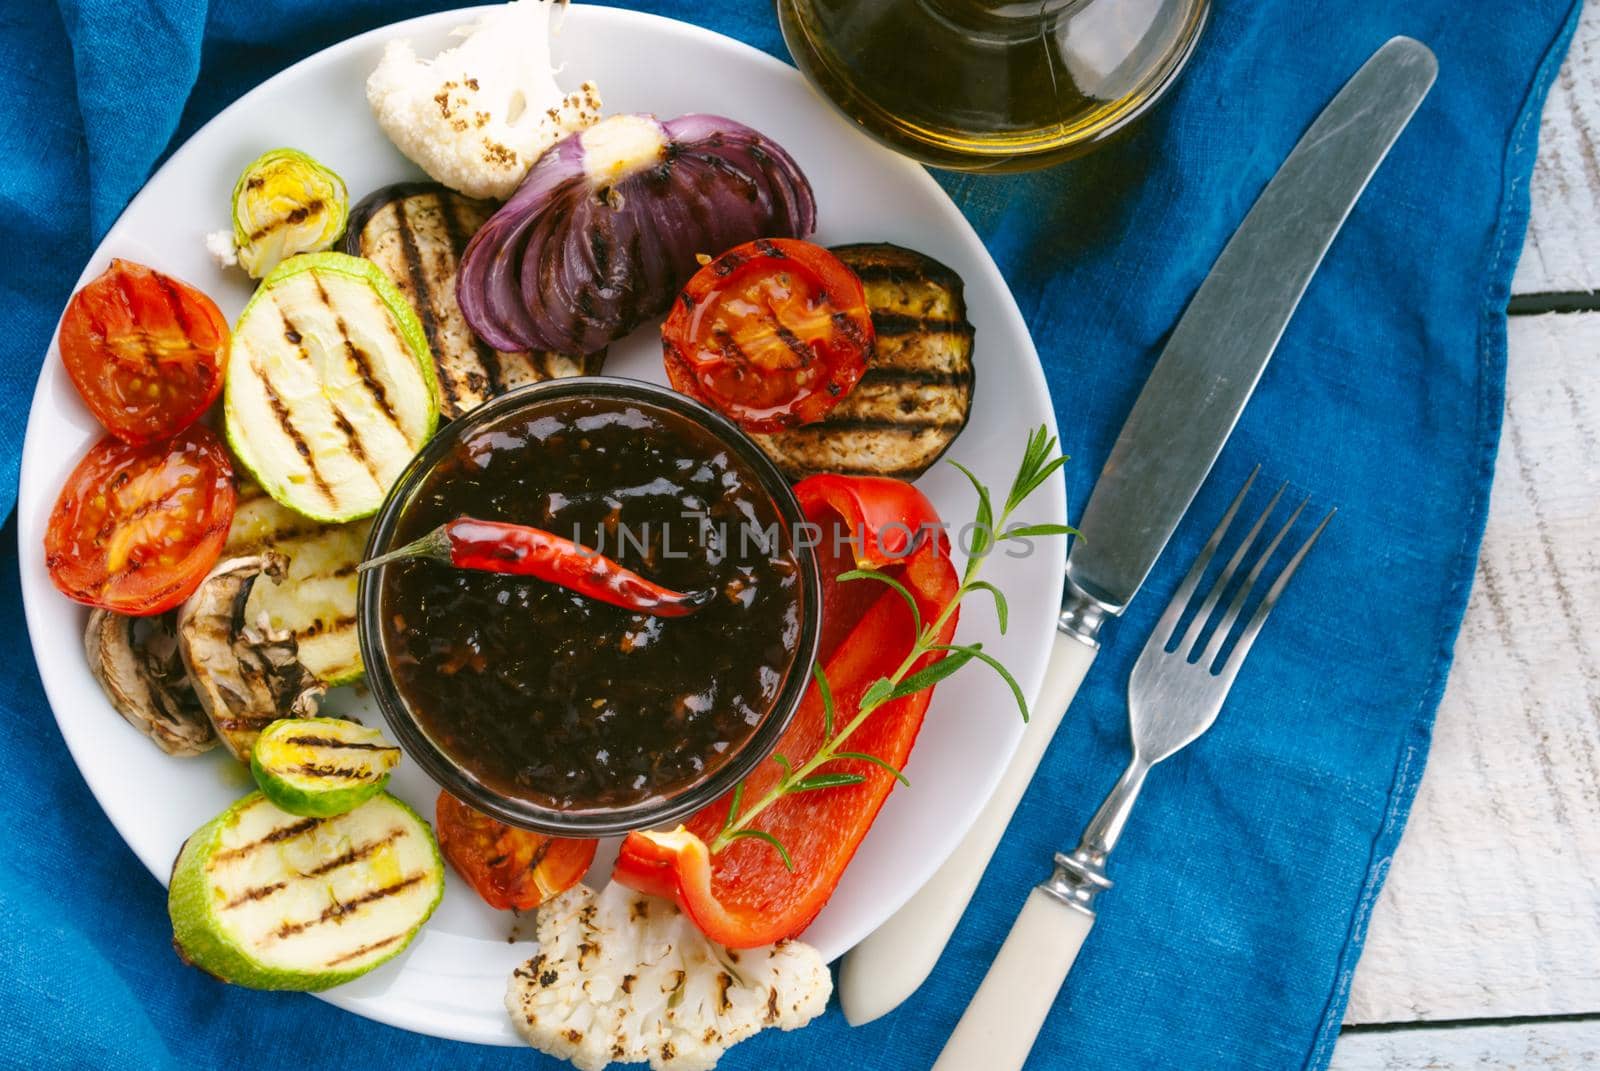 grilled vegetables with teriyaki sauce. High quality photo